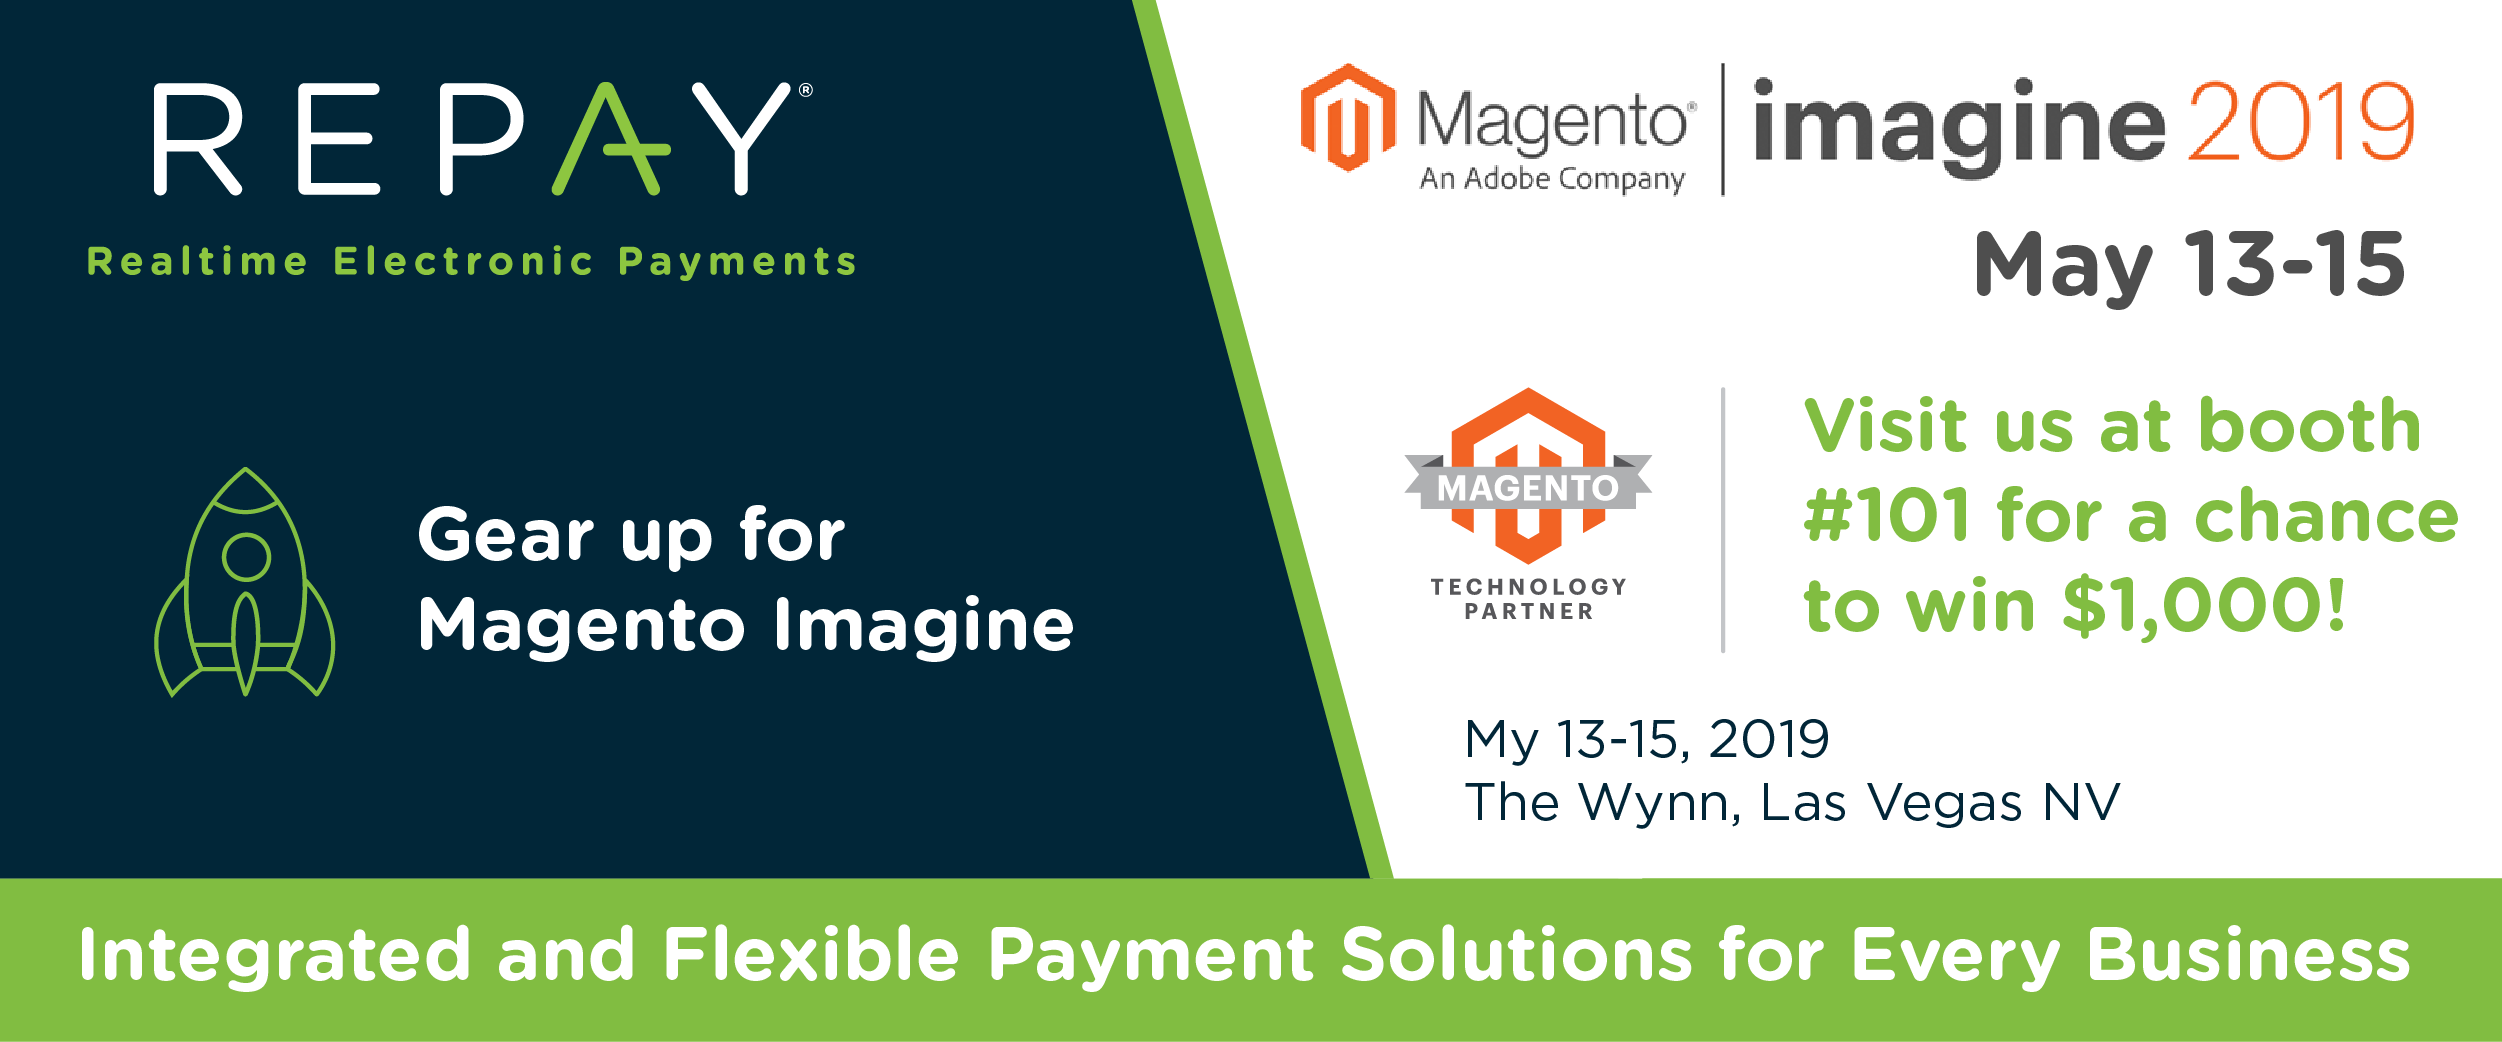 Savings and Security with Magento B2B eCommerce Integrated Payments